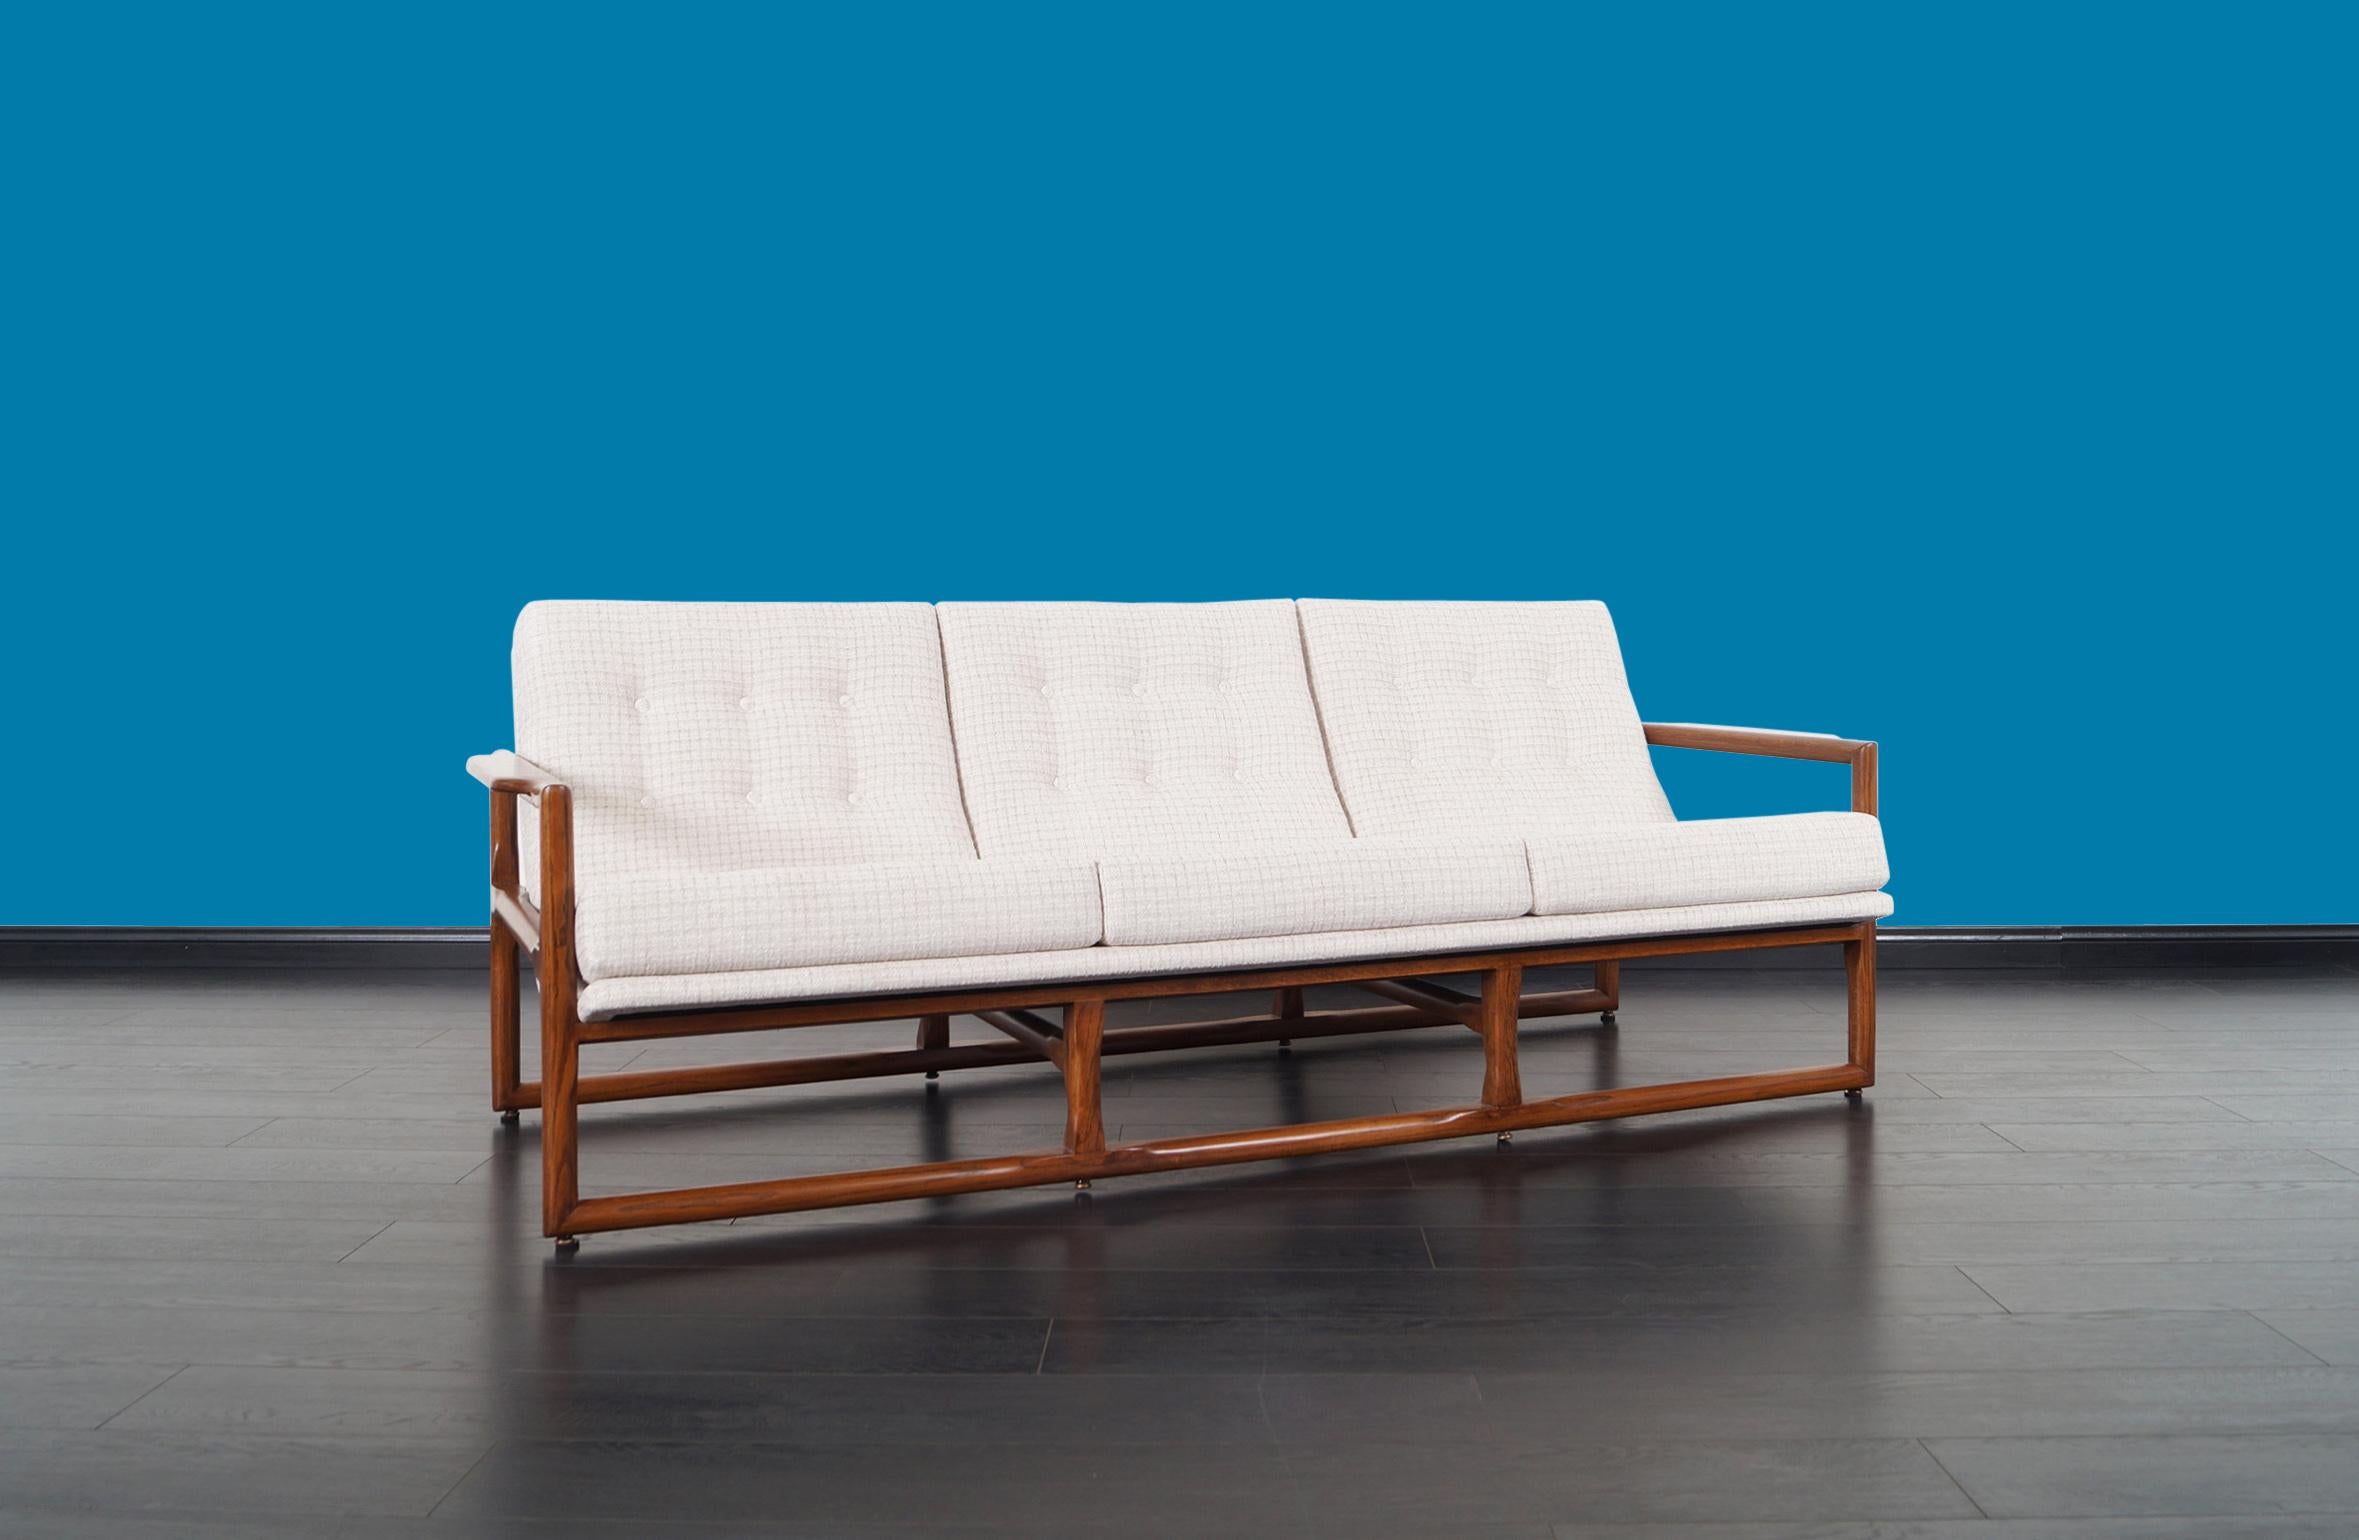 Exceptional mid-century “Cube” sofa designed attributed to Milo Baughman, circa 1970s. This wonderful sofa is characterized by its design and comfort, it has a solid walnut stain frame that wraps around the backrest giving the perfect color